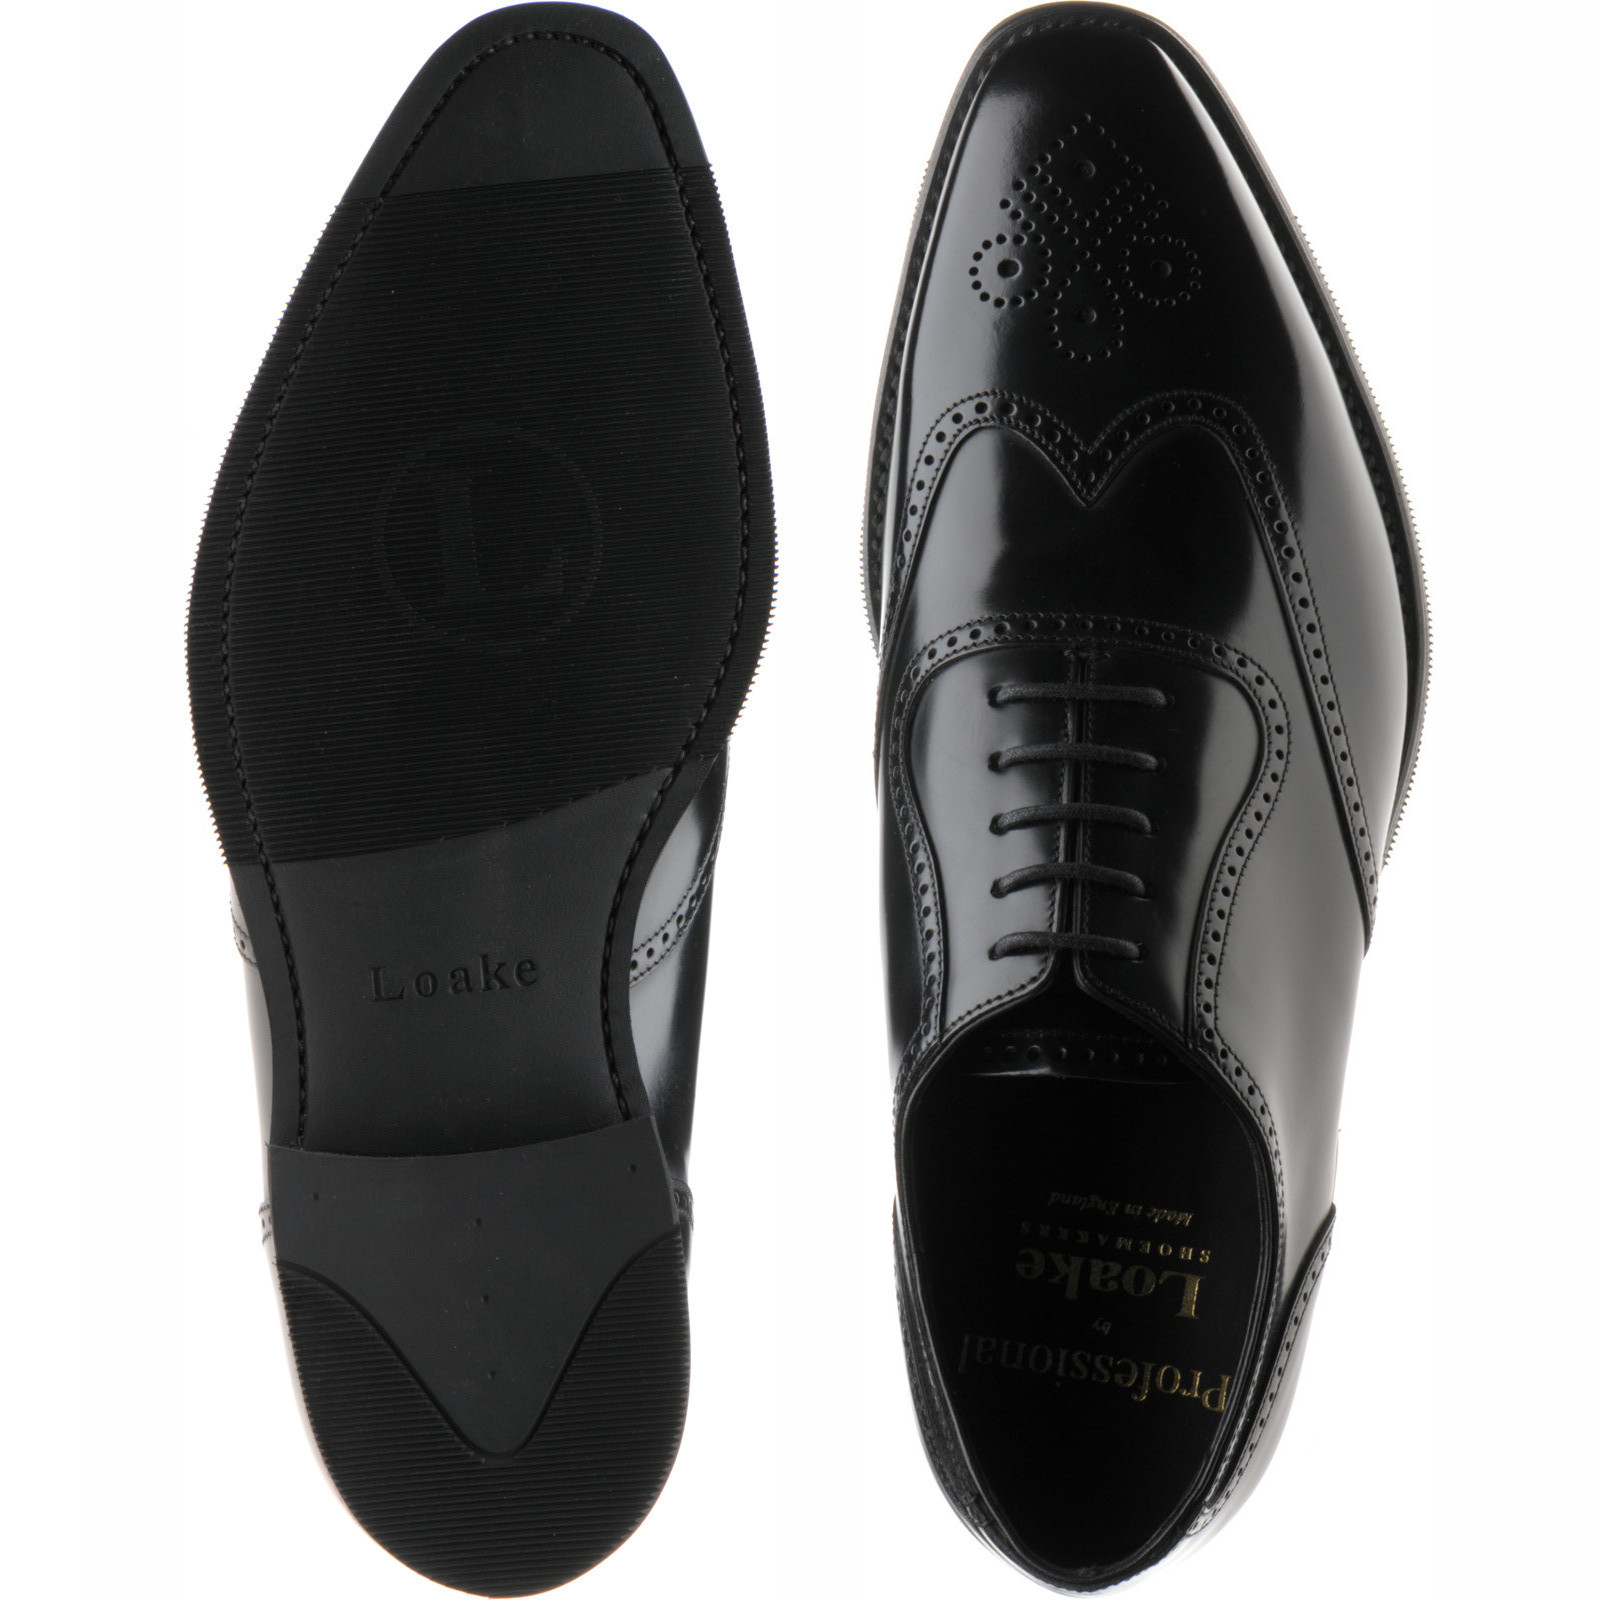 Loake shoes | Loake Professional | Tay in Black Polished at Herring Shoes